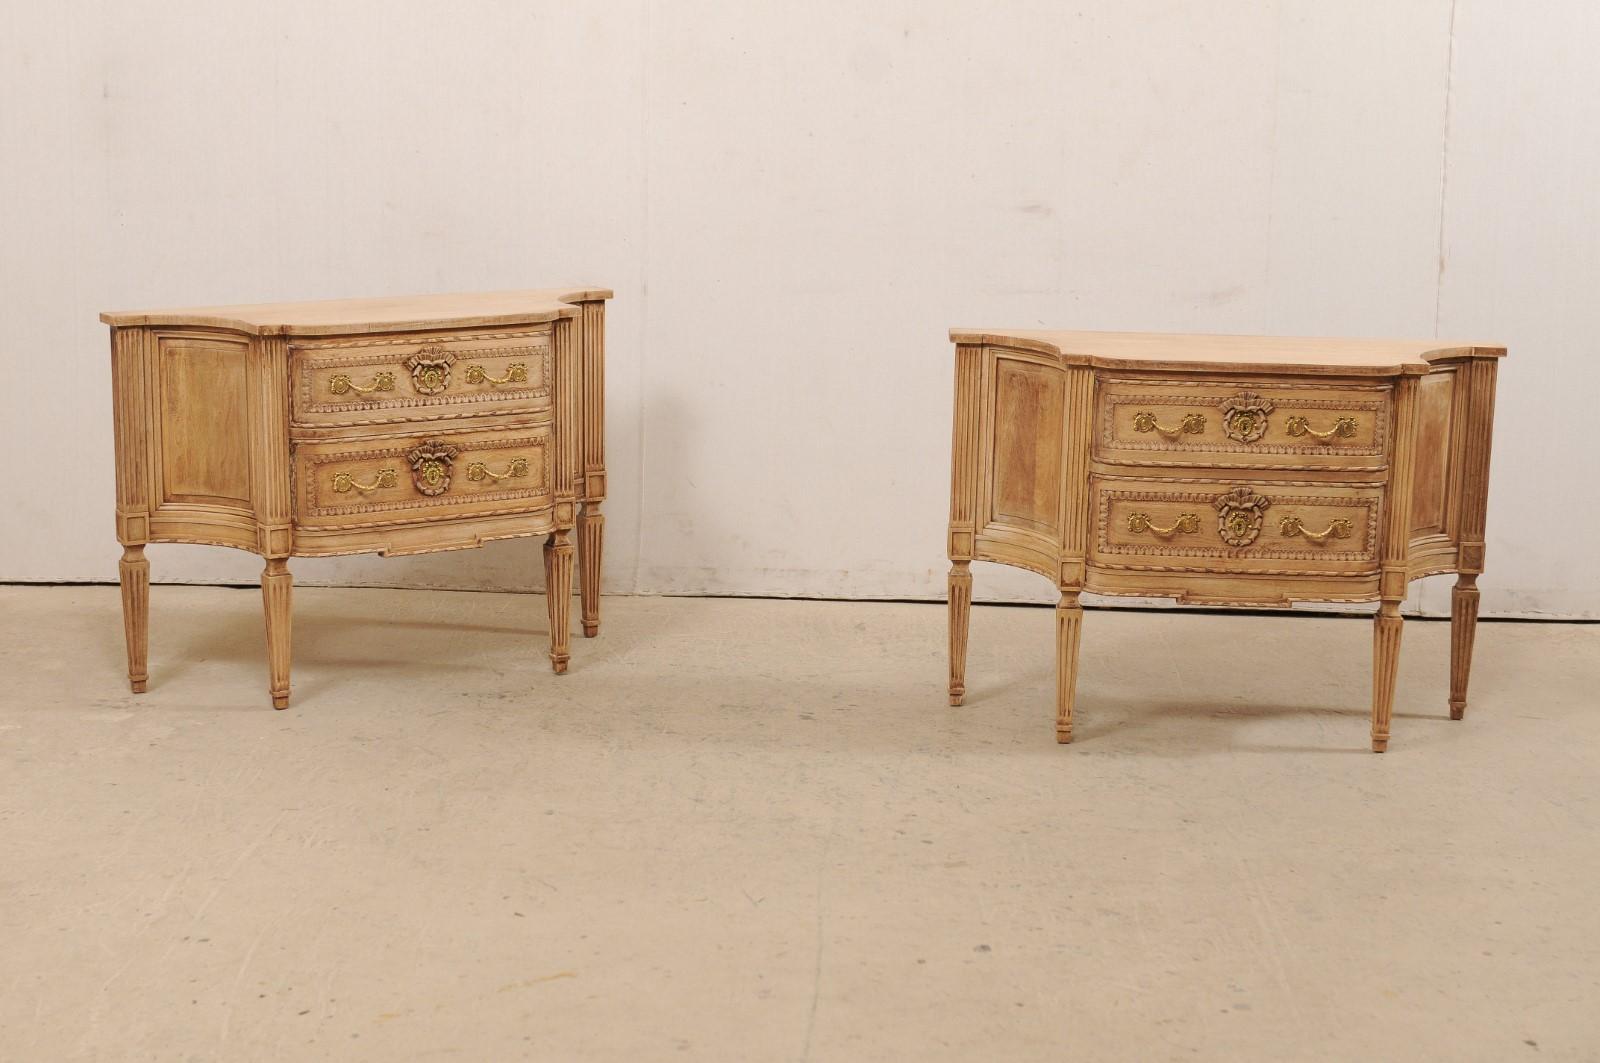 An Italian pair of bleached wood two-drawer chests, neoclassical in style. This vintage pair of raised chests from Italy each feature an elongated backside with shorter front, and graceful concave-scalloped sides, which lends these pieces to also